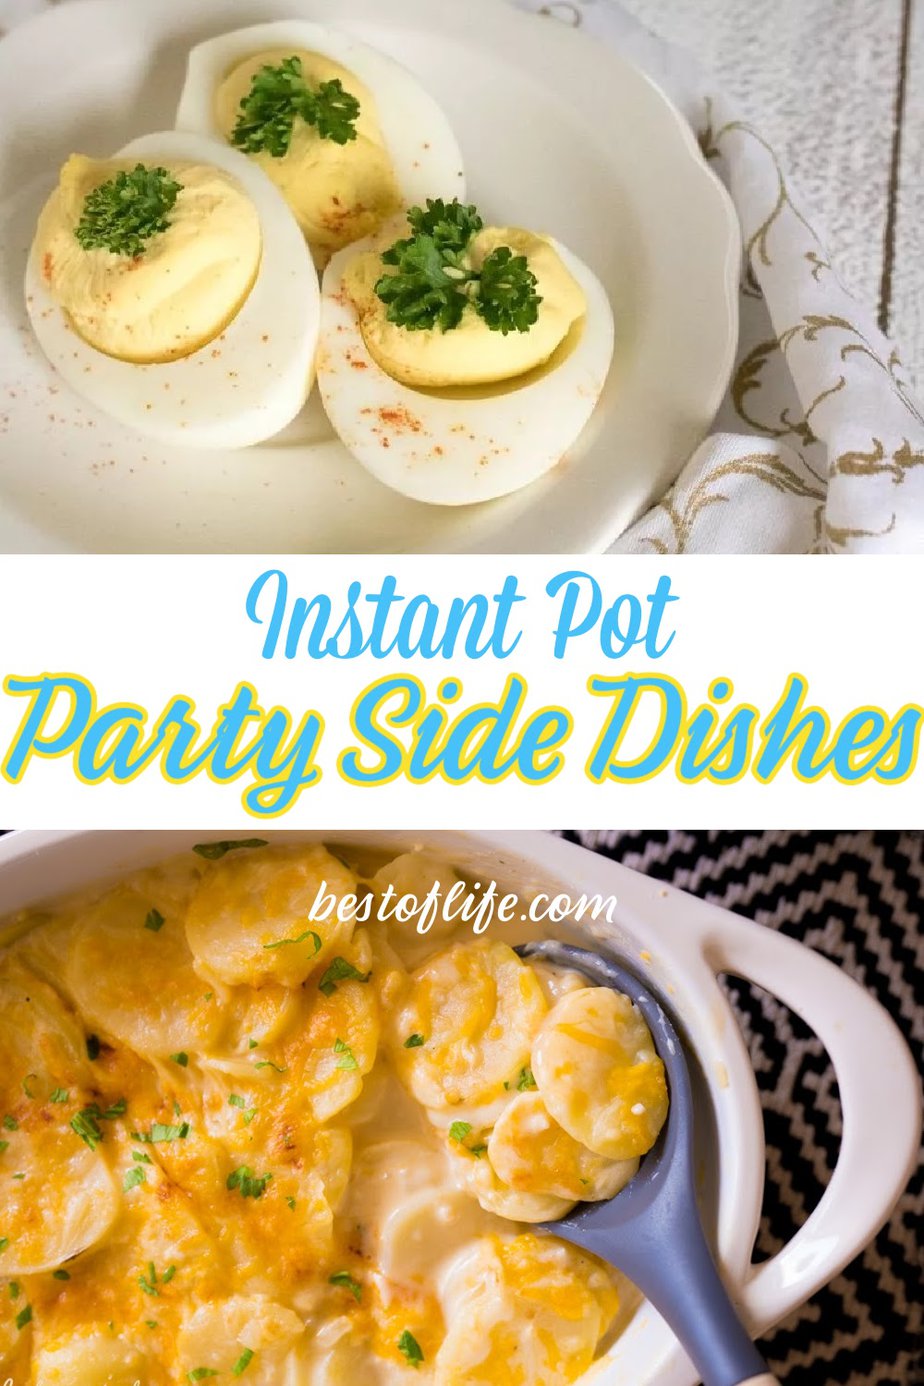 The best Instant Pot party side dishes are perfect party snacks that can also enhance the dinner party meal at any gathering. Party Side Dishes Instant Pot | Instant Pot Party Sides | Pressure Cooker Party Recipes | Recipes for Parties | Tips for Hosting a Party | Party Food Ideas | Party Snack Recipes #partyplanning #instantpot via @thebestoflife